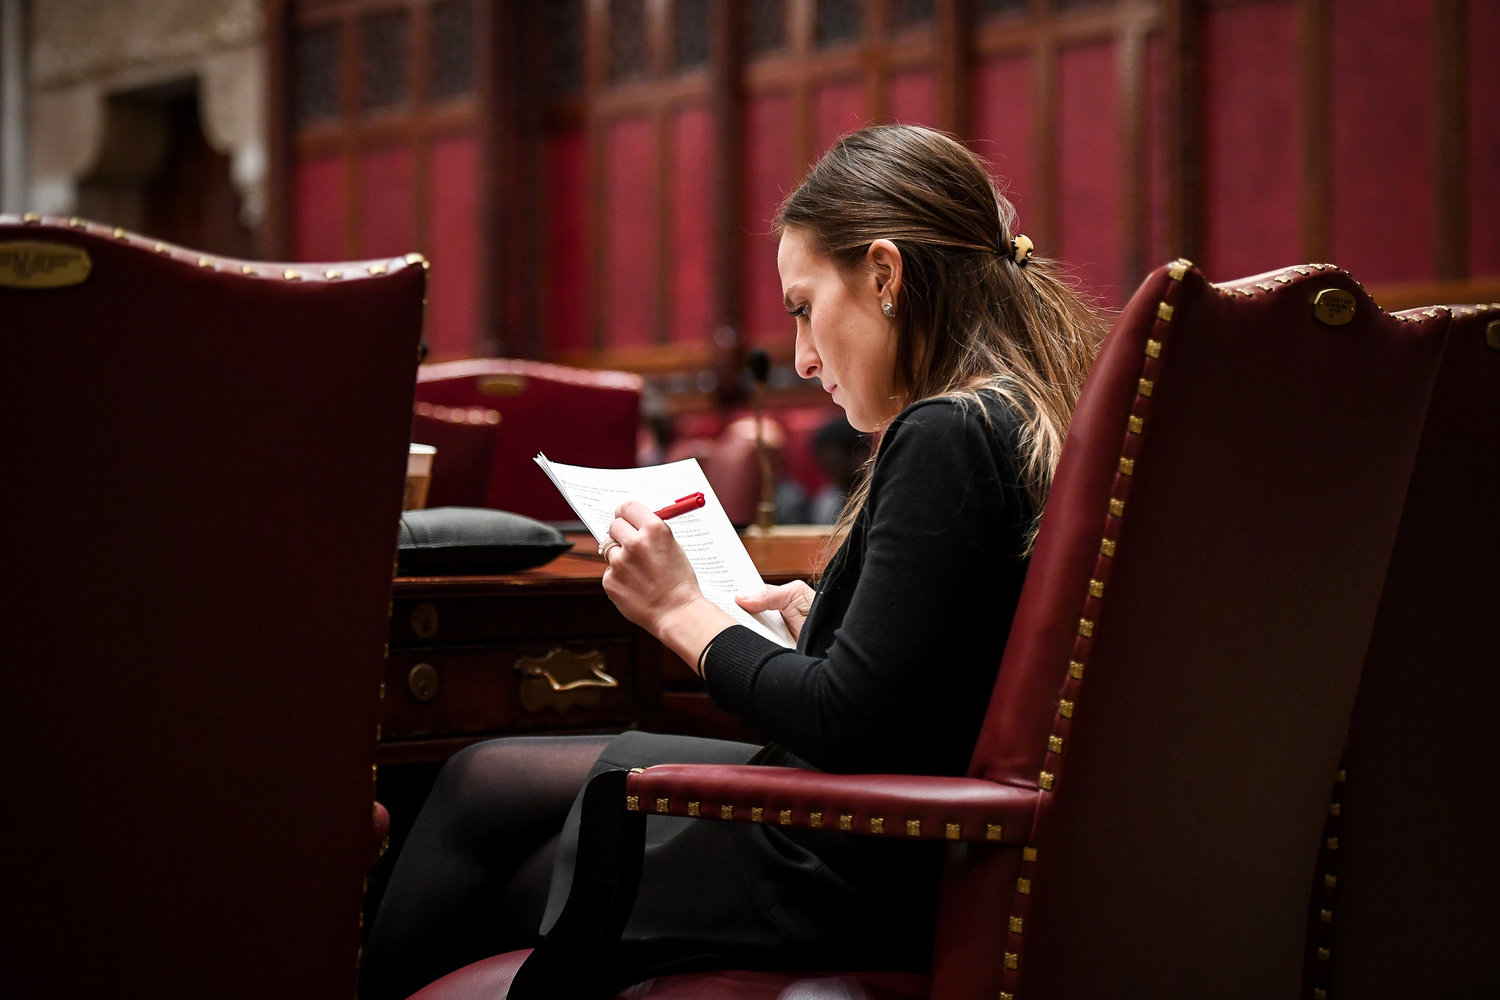 State Sen. Alessandra Biaggi and Assemblyman Ron Kim repealed Gov. Andrew Cuomo’s law making nursing homes immune to liability to coronavirus-related claims as part of this year’s budget process. The $212 billion budget also raised taxes on the rich and included substantial spending on progressive priorities like rent relief and funding public education.